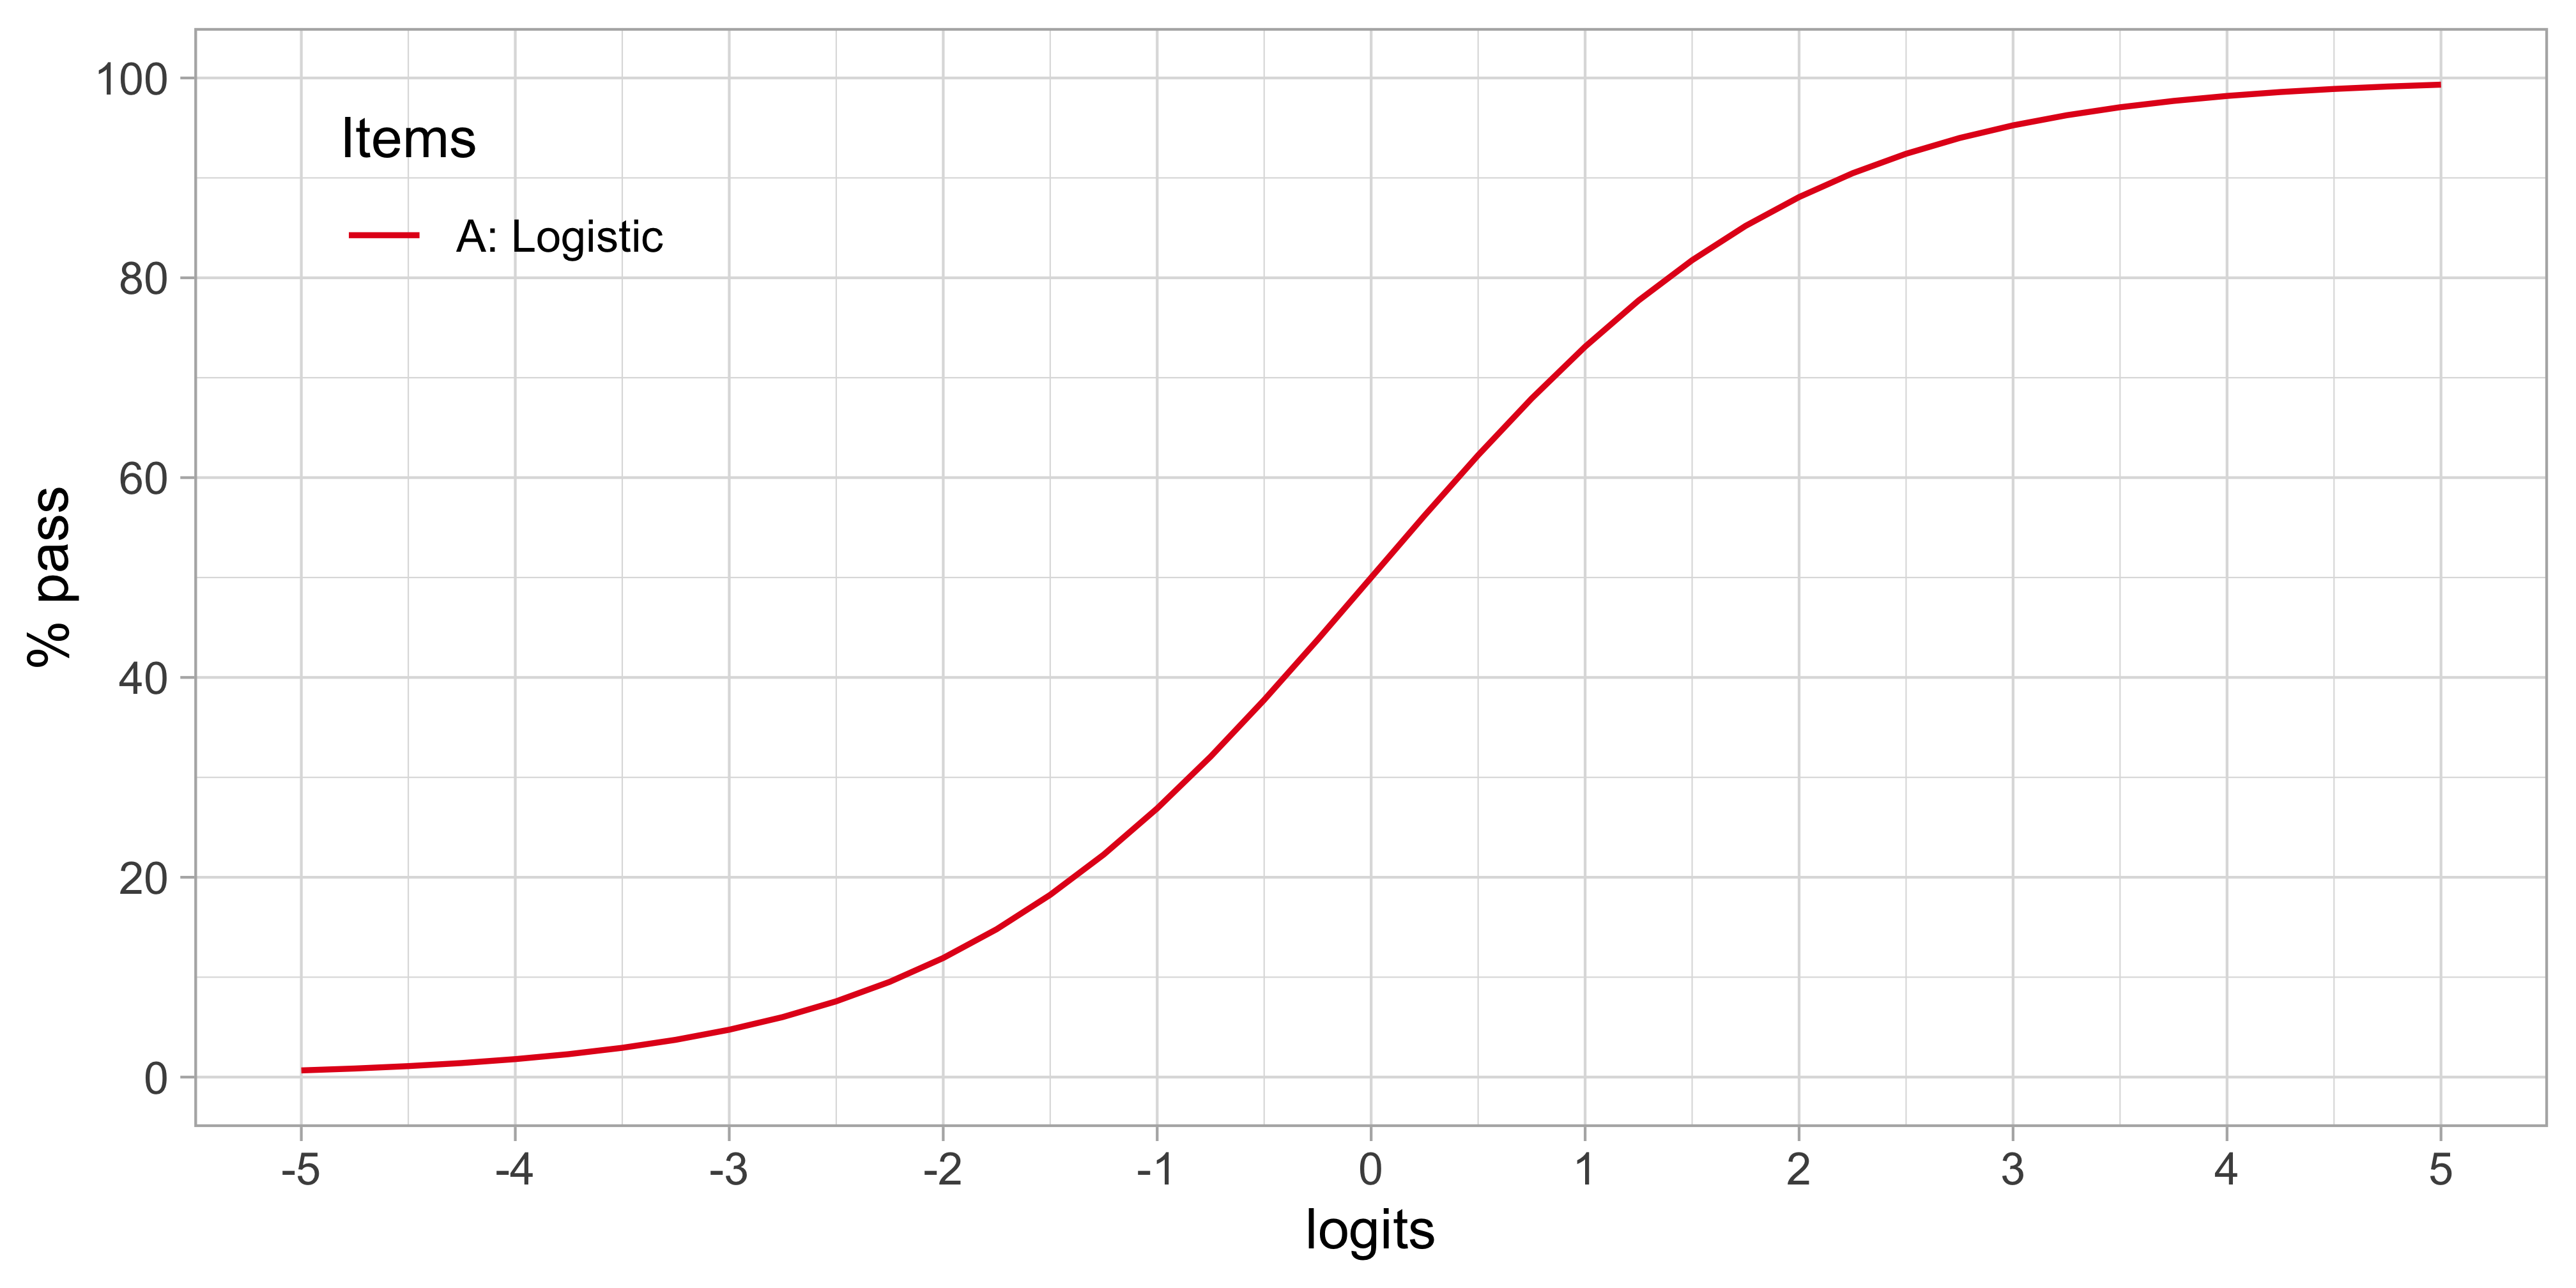 Standard logistic curve. Percentage of children passing an item for a given ability-difficulty gap \(\beta_n - \delta_i\).